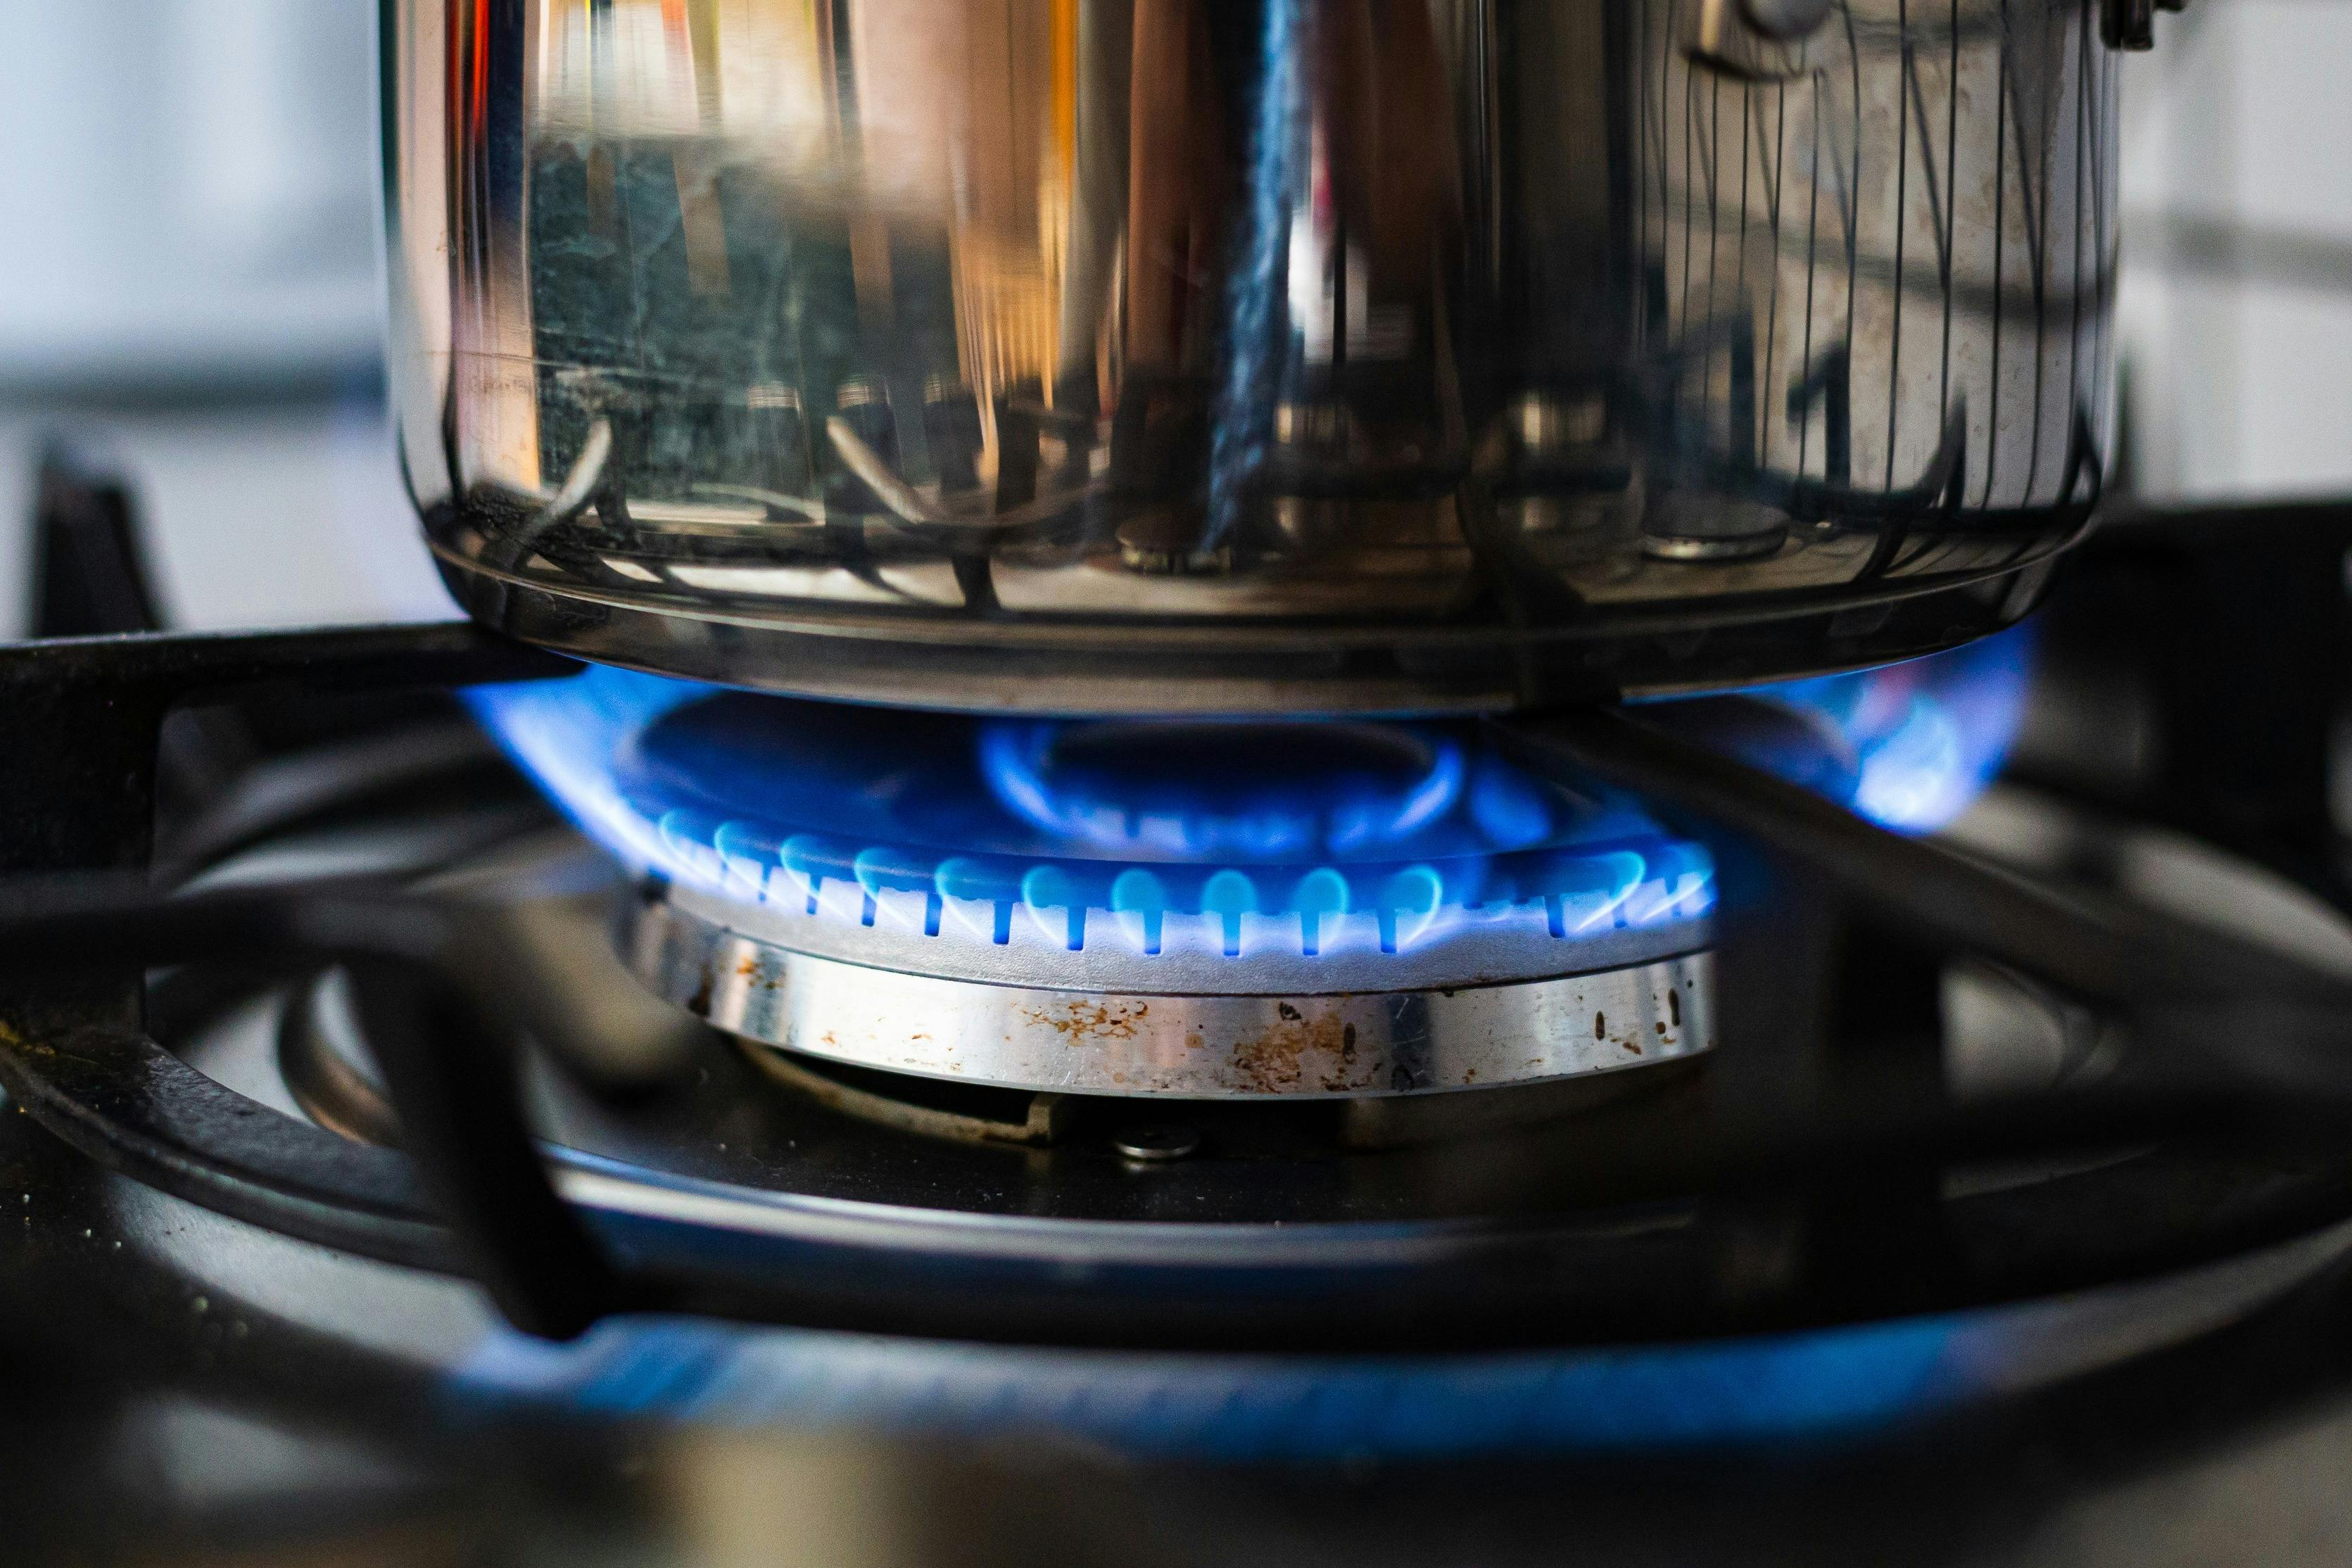 How Does the Green Gas Levy Affect Businesses?